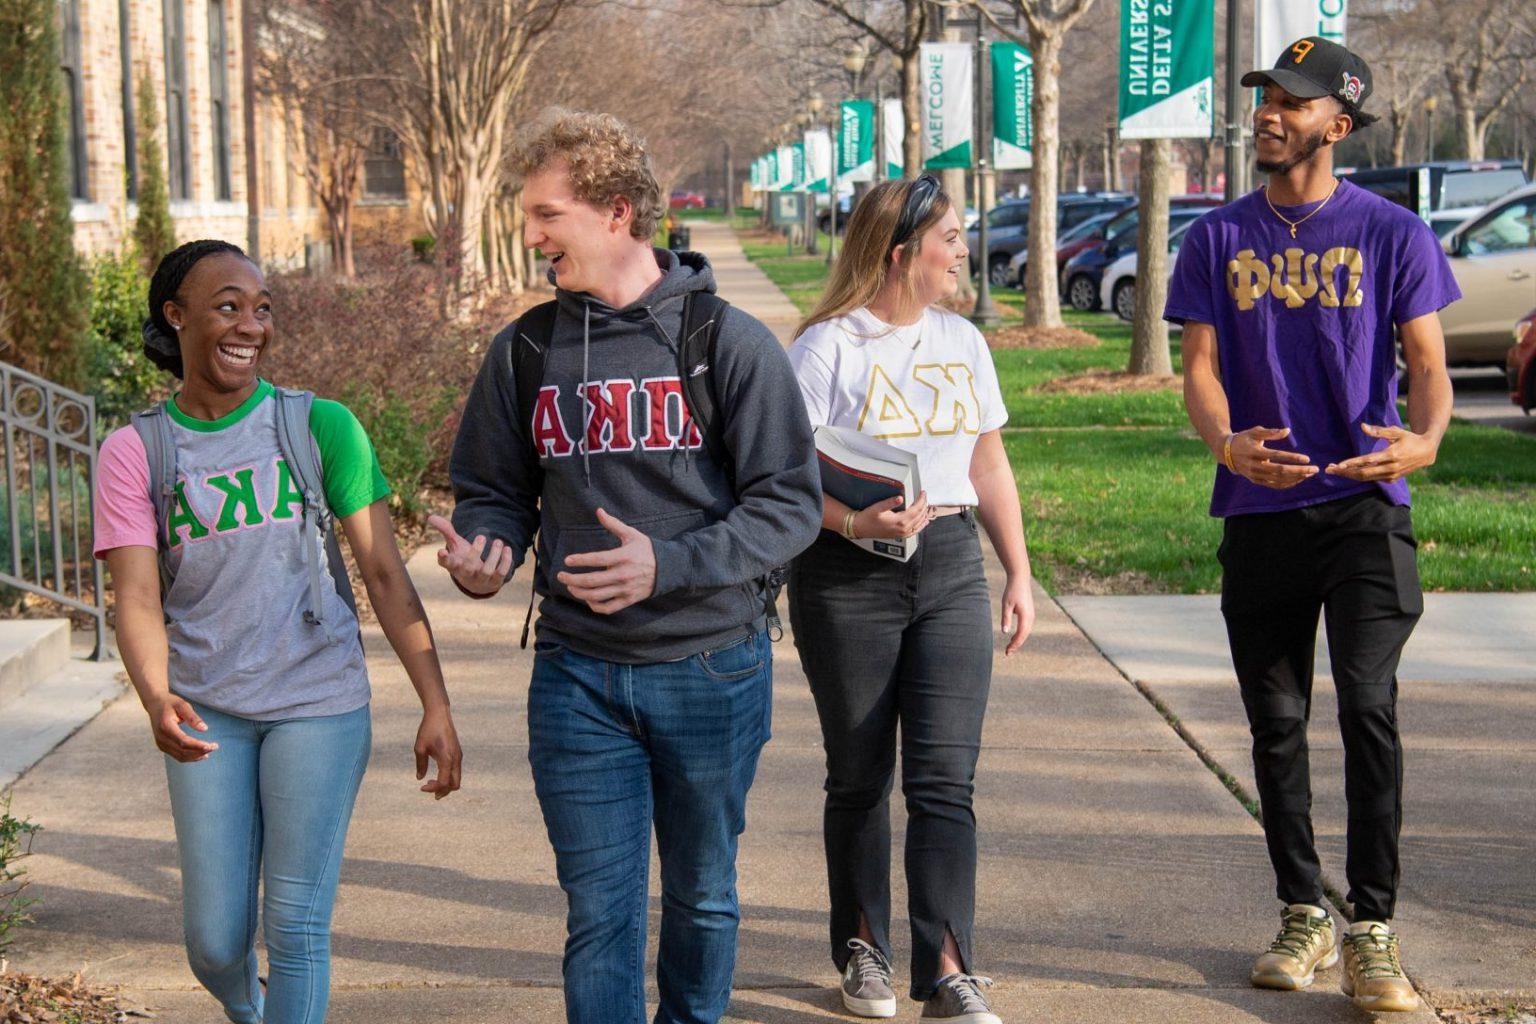 Greek Life students walking and engaging with each other on campus.